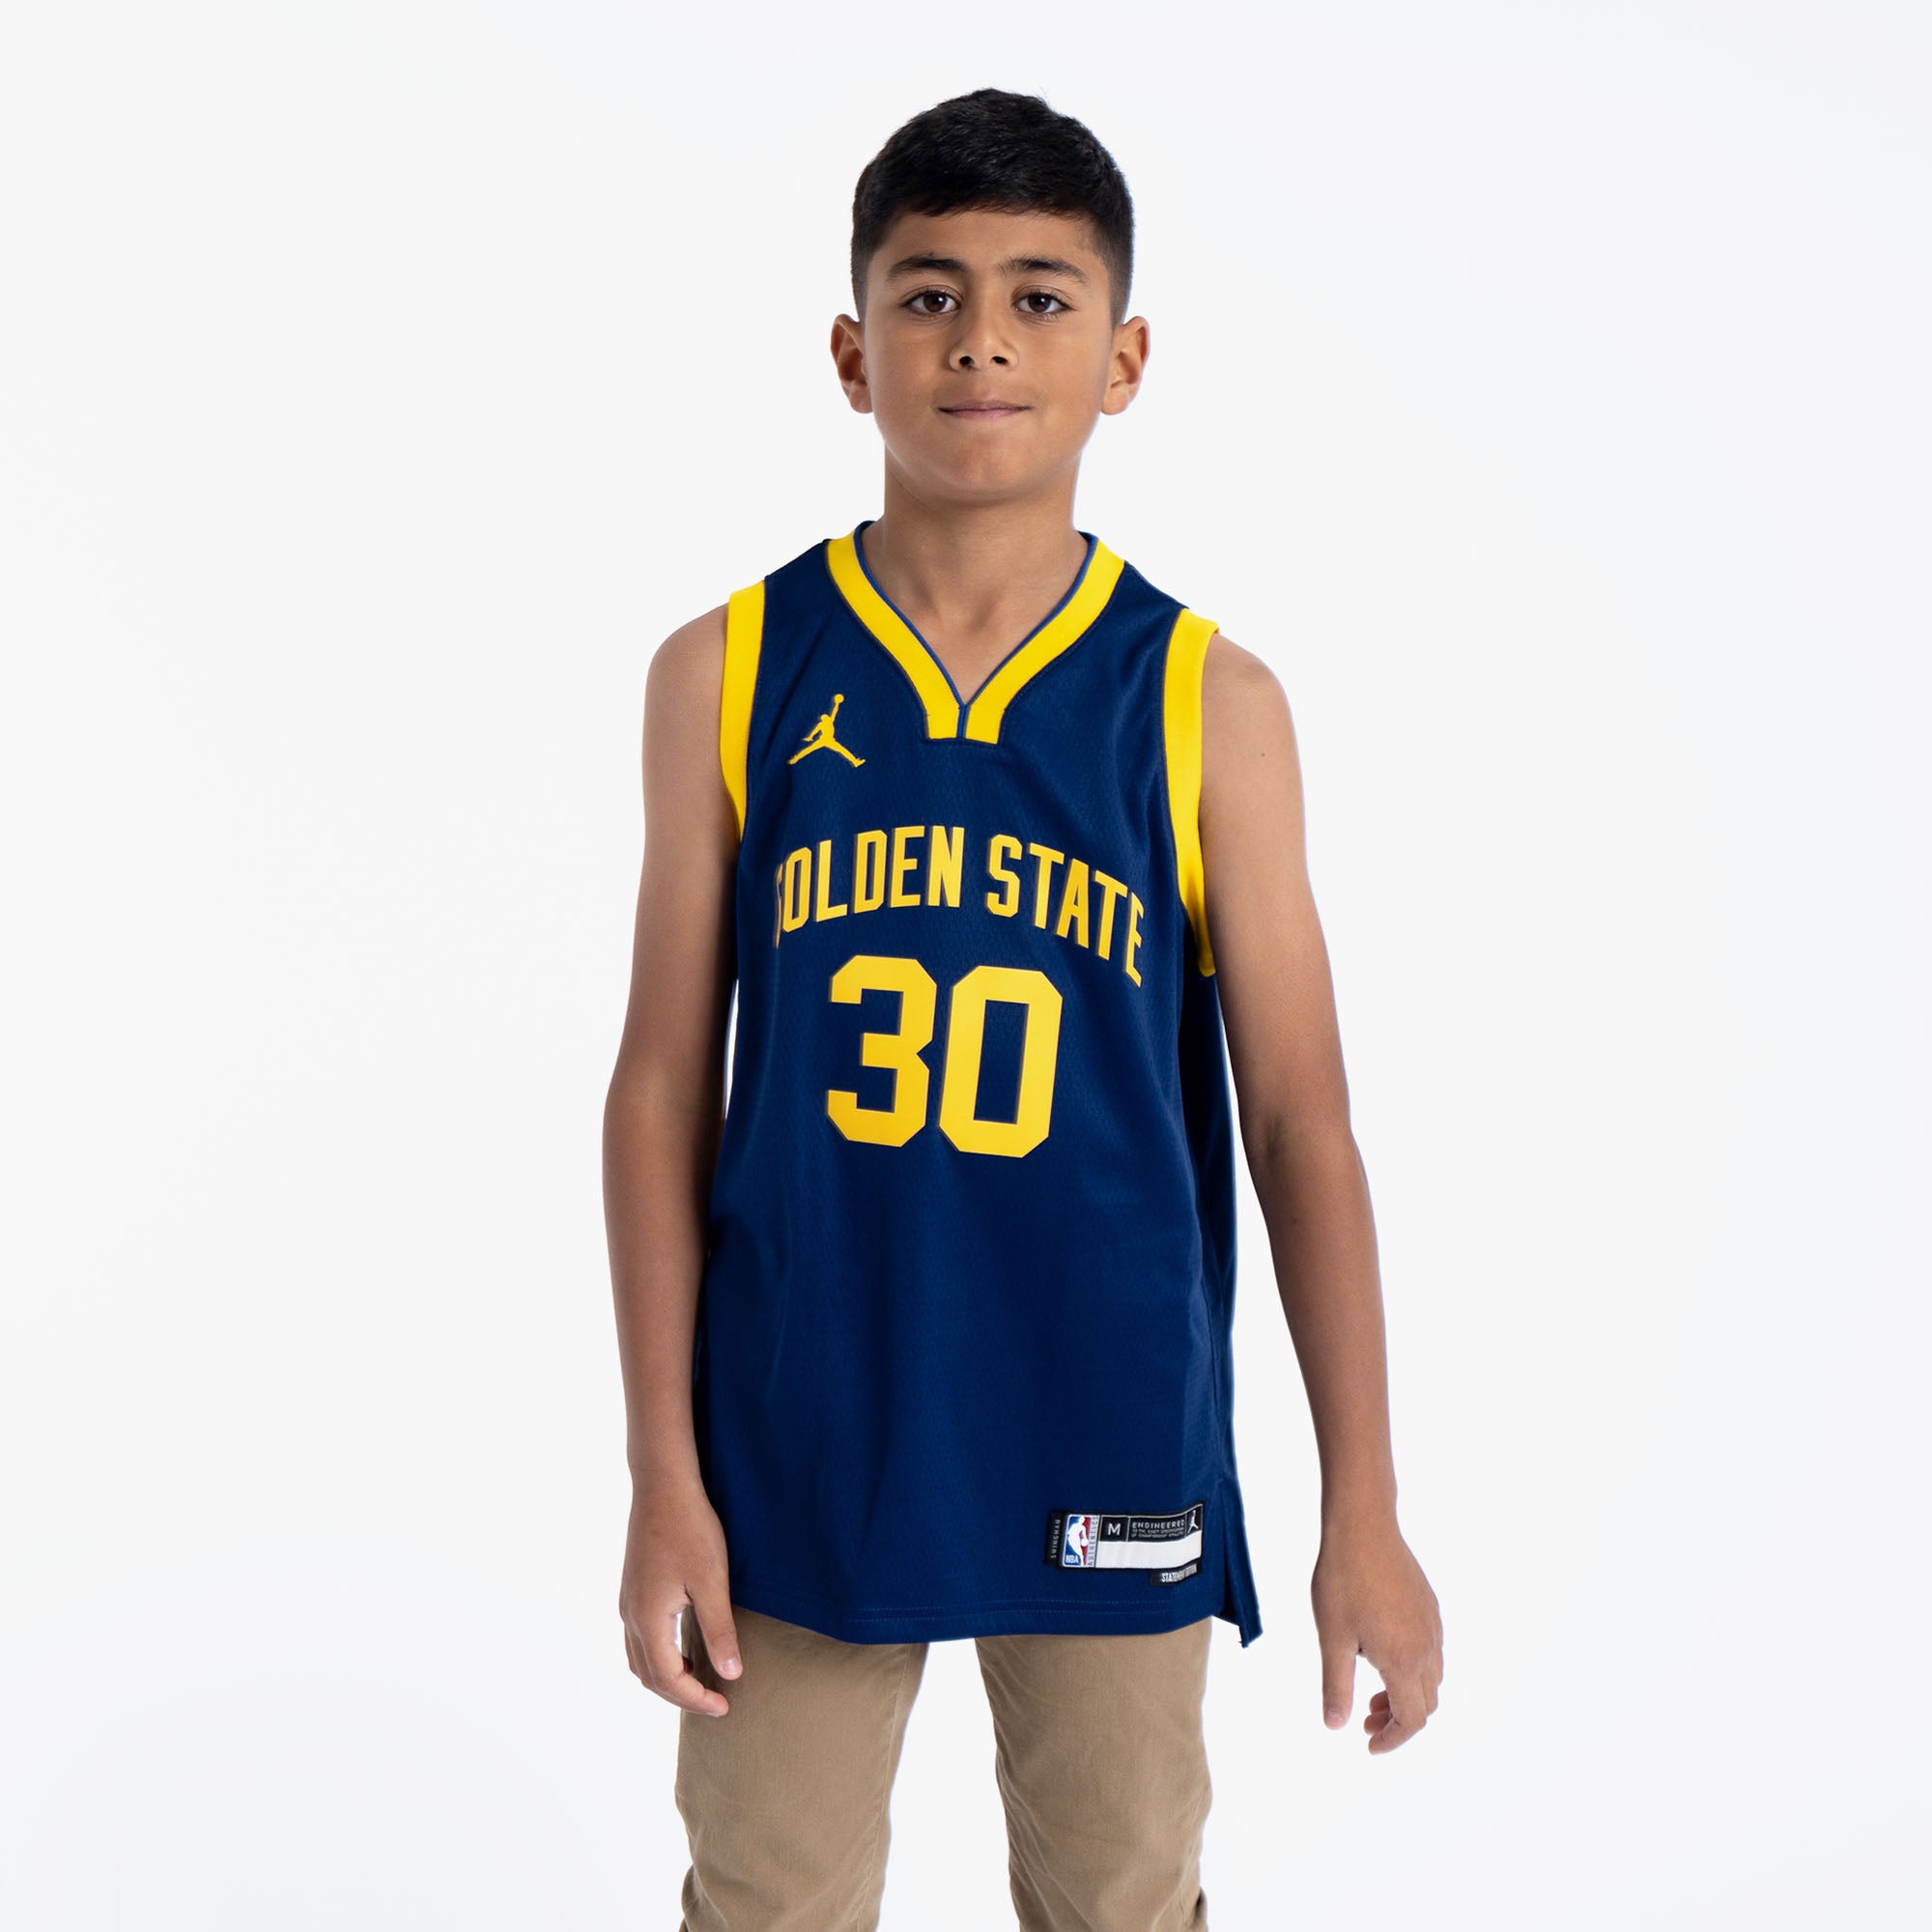 Golden State Warriors Jersey For Babies, Youth, Women, or Men